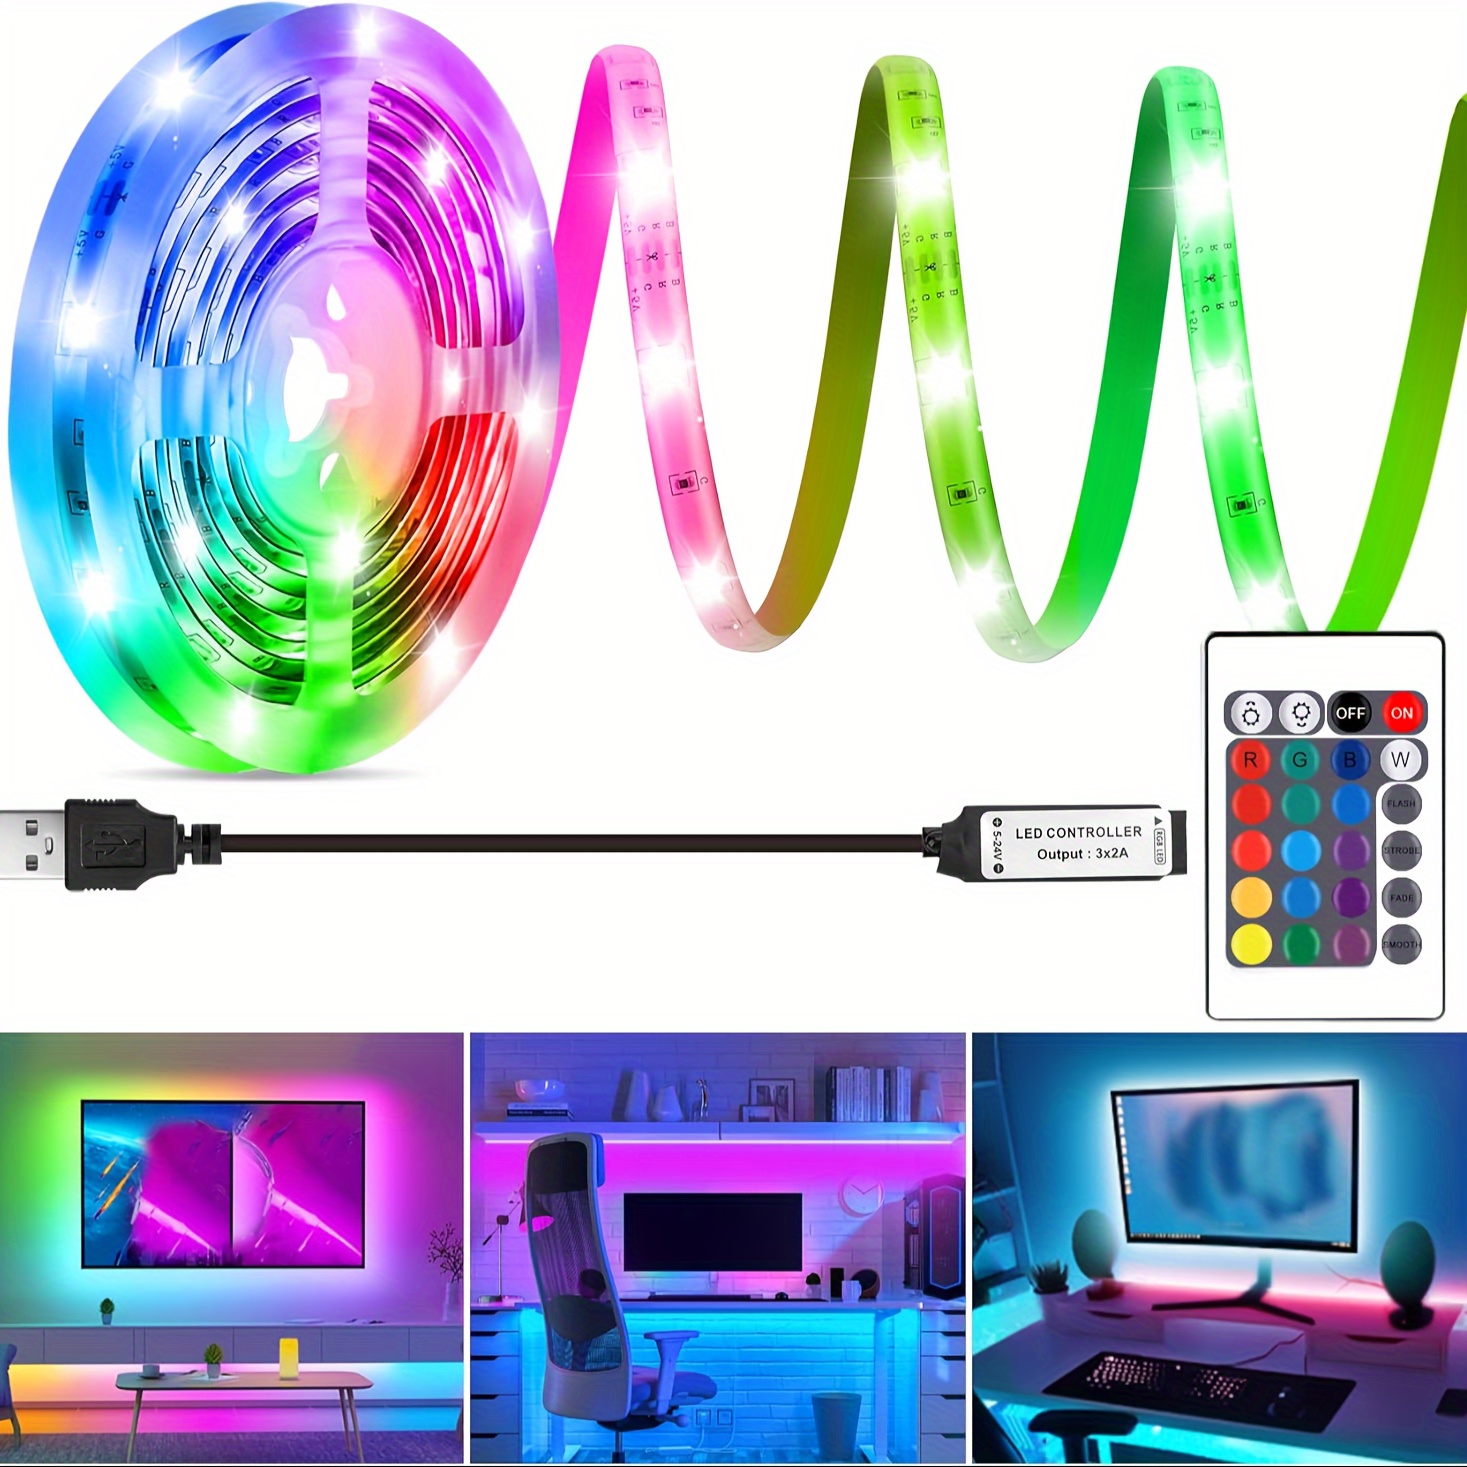 Spool of Luminous LED Strip Light Connected To Power Supply. Stock Image -  Image of efficient, object: 80641409